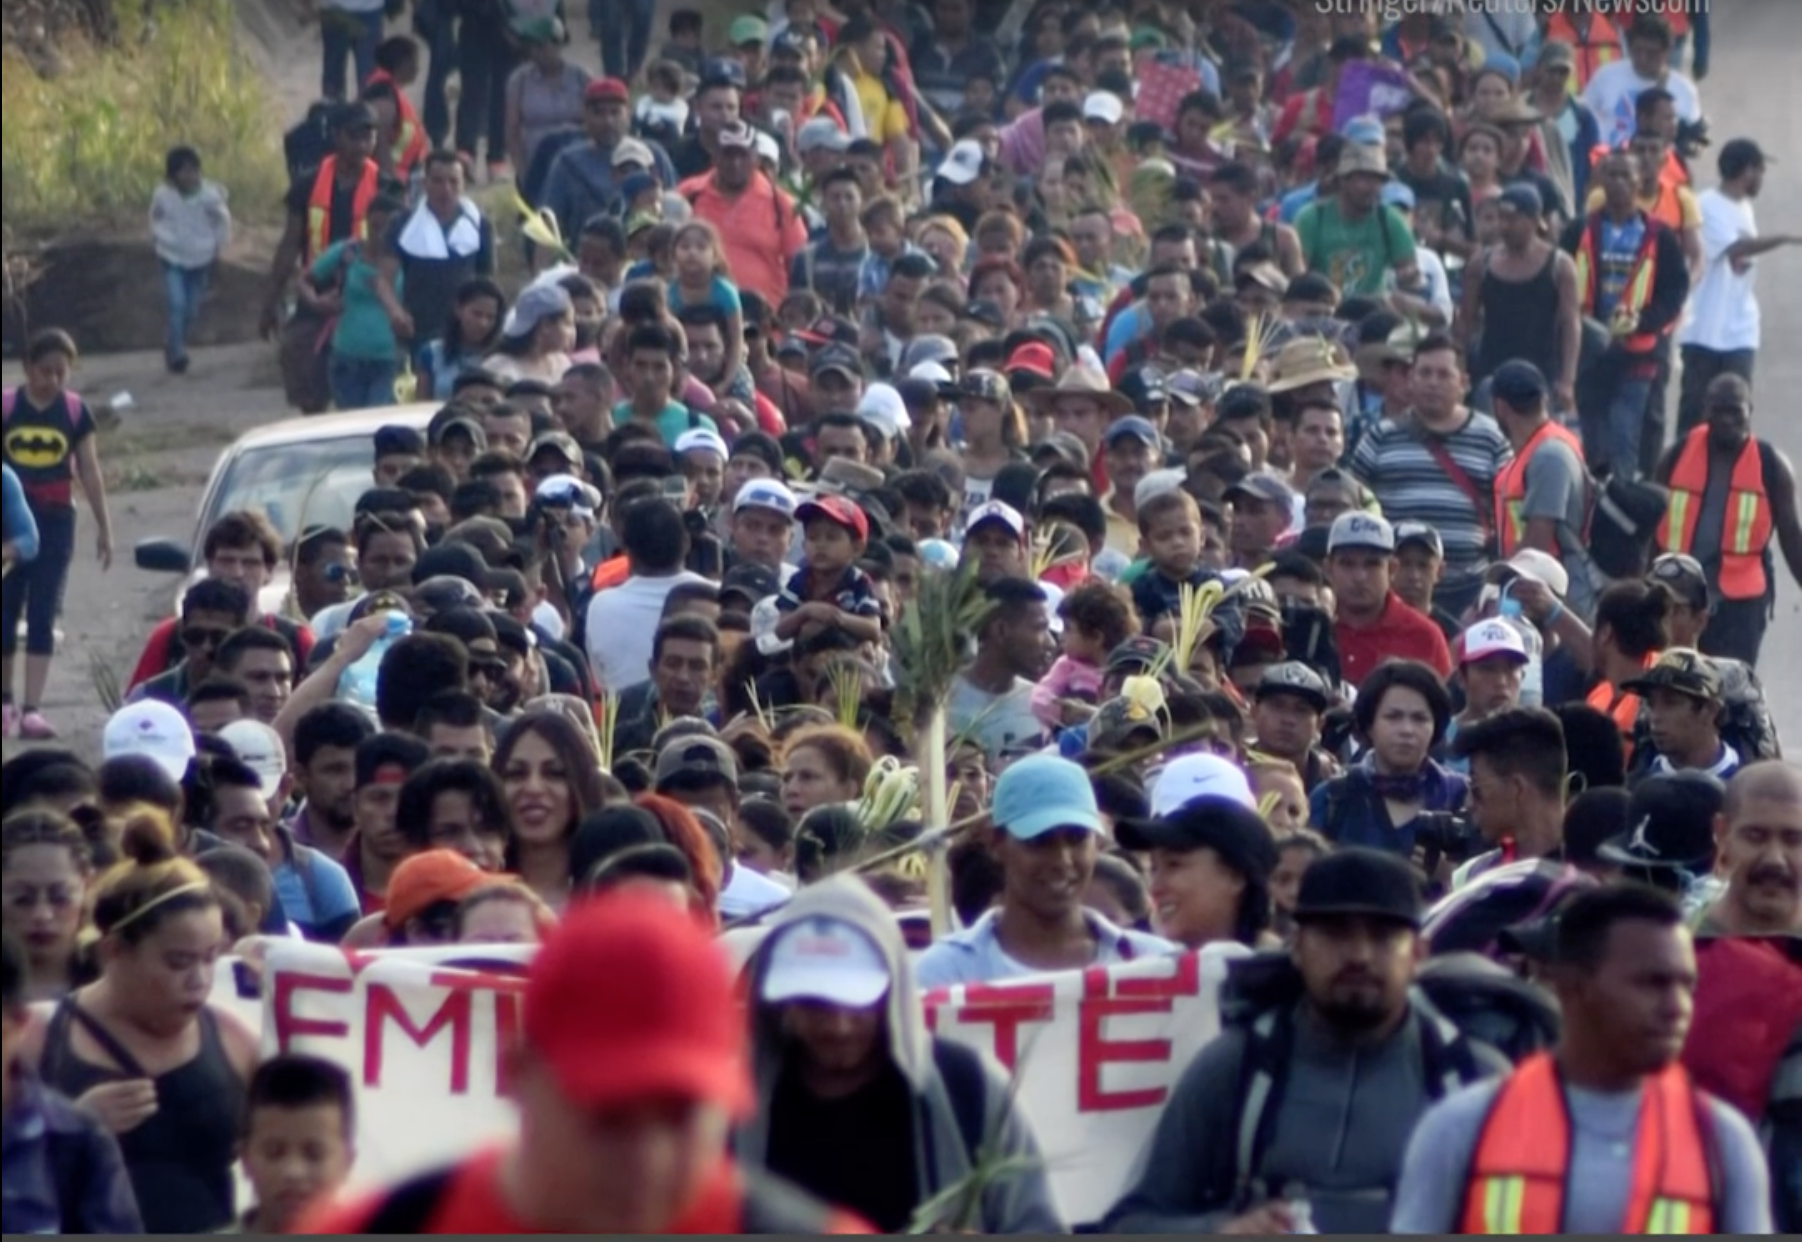 Migrants Caravan In Limbo After US Immigration Says Border Crossing Has “Reached Capacity”